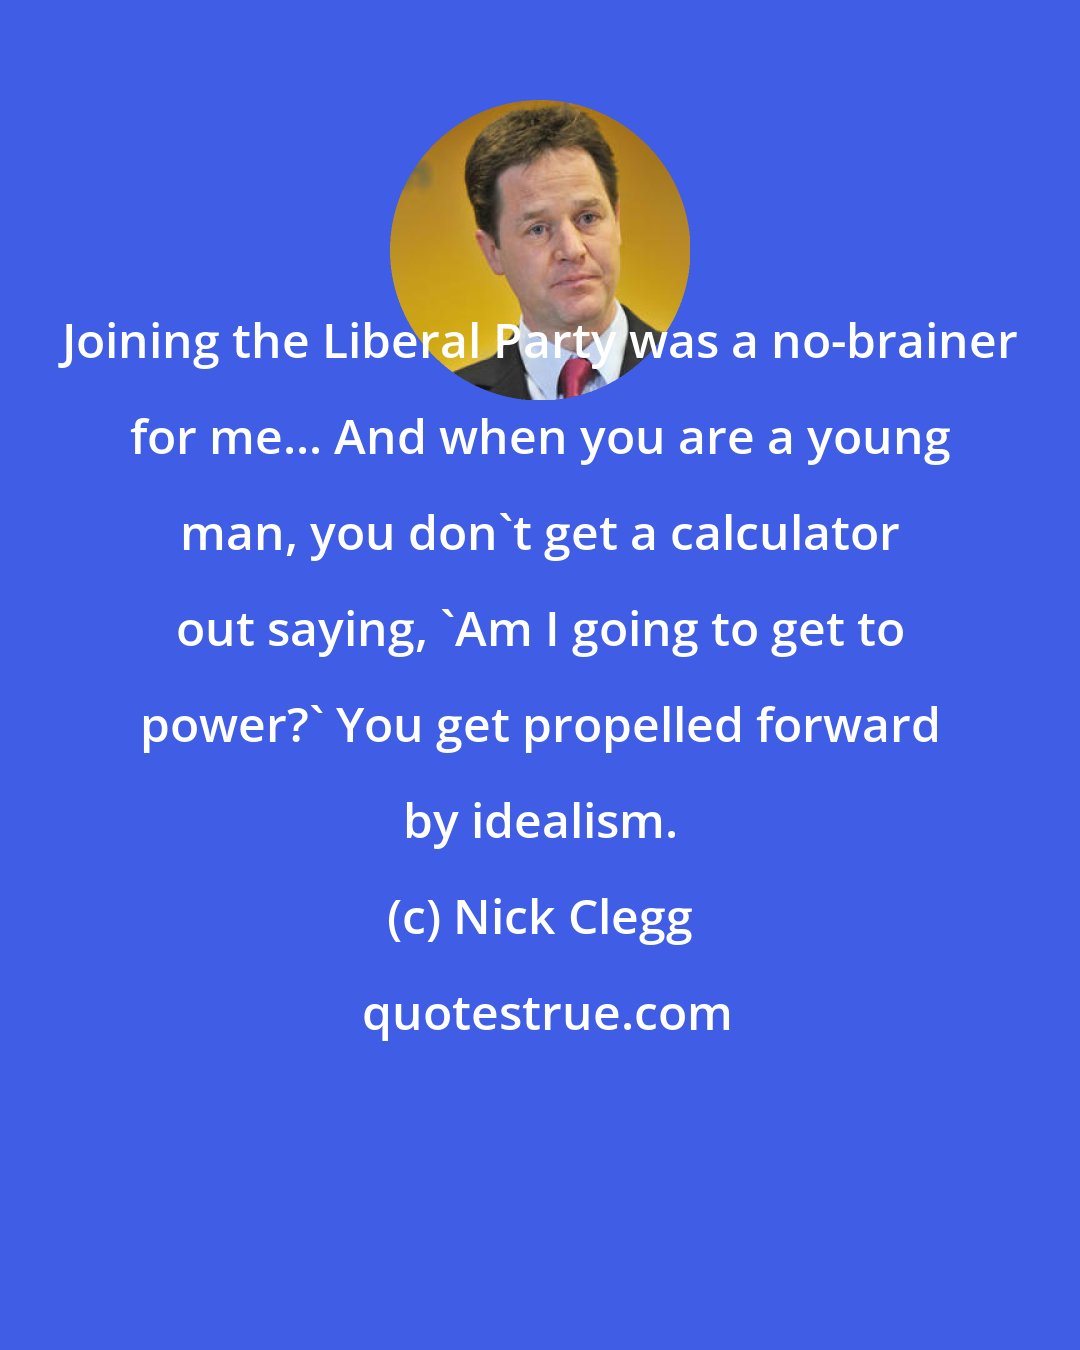 Nick Clegg: Joining the Liberal Party was a no-brainer for me... And when you are a young man, you don't get a calculator out saying, 'Am I going to get to power?' You get propelled forward by idealism.